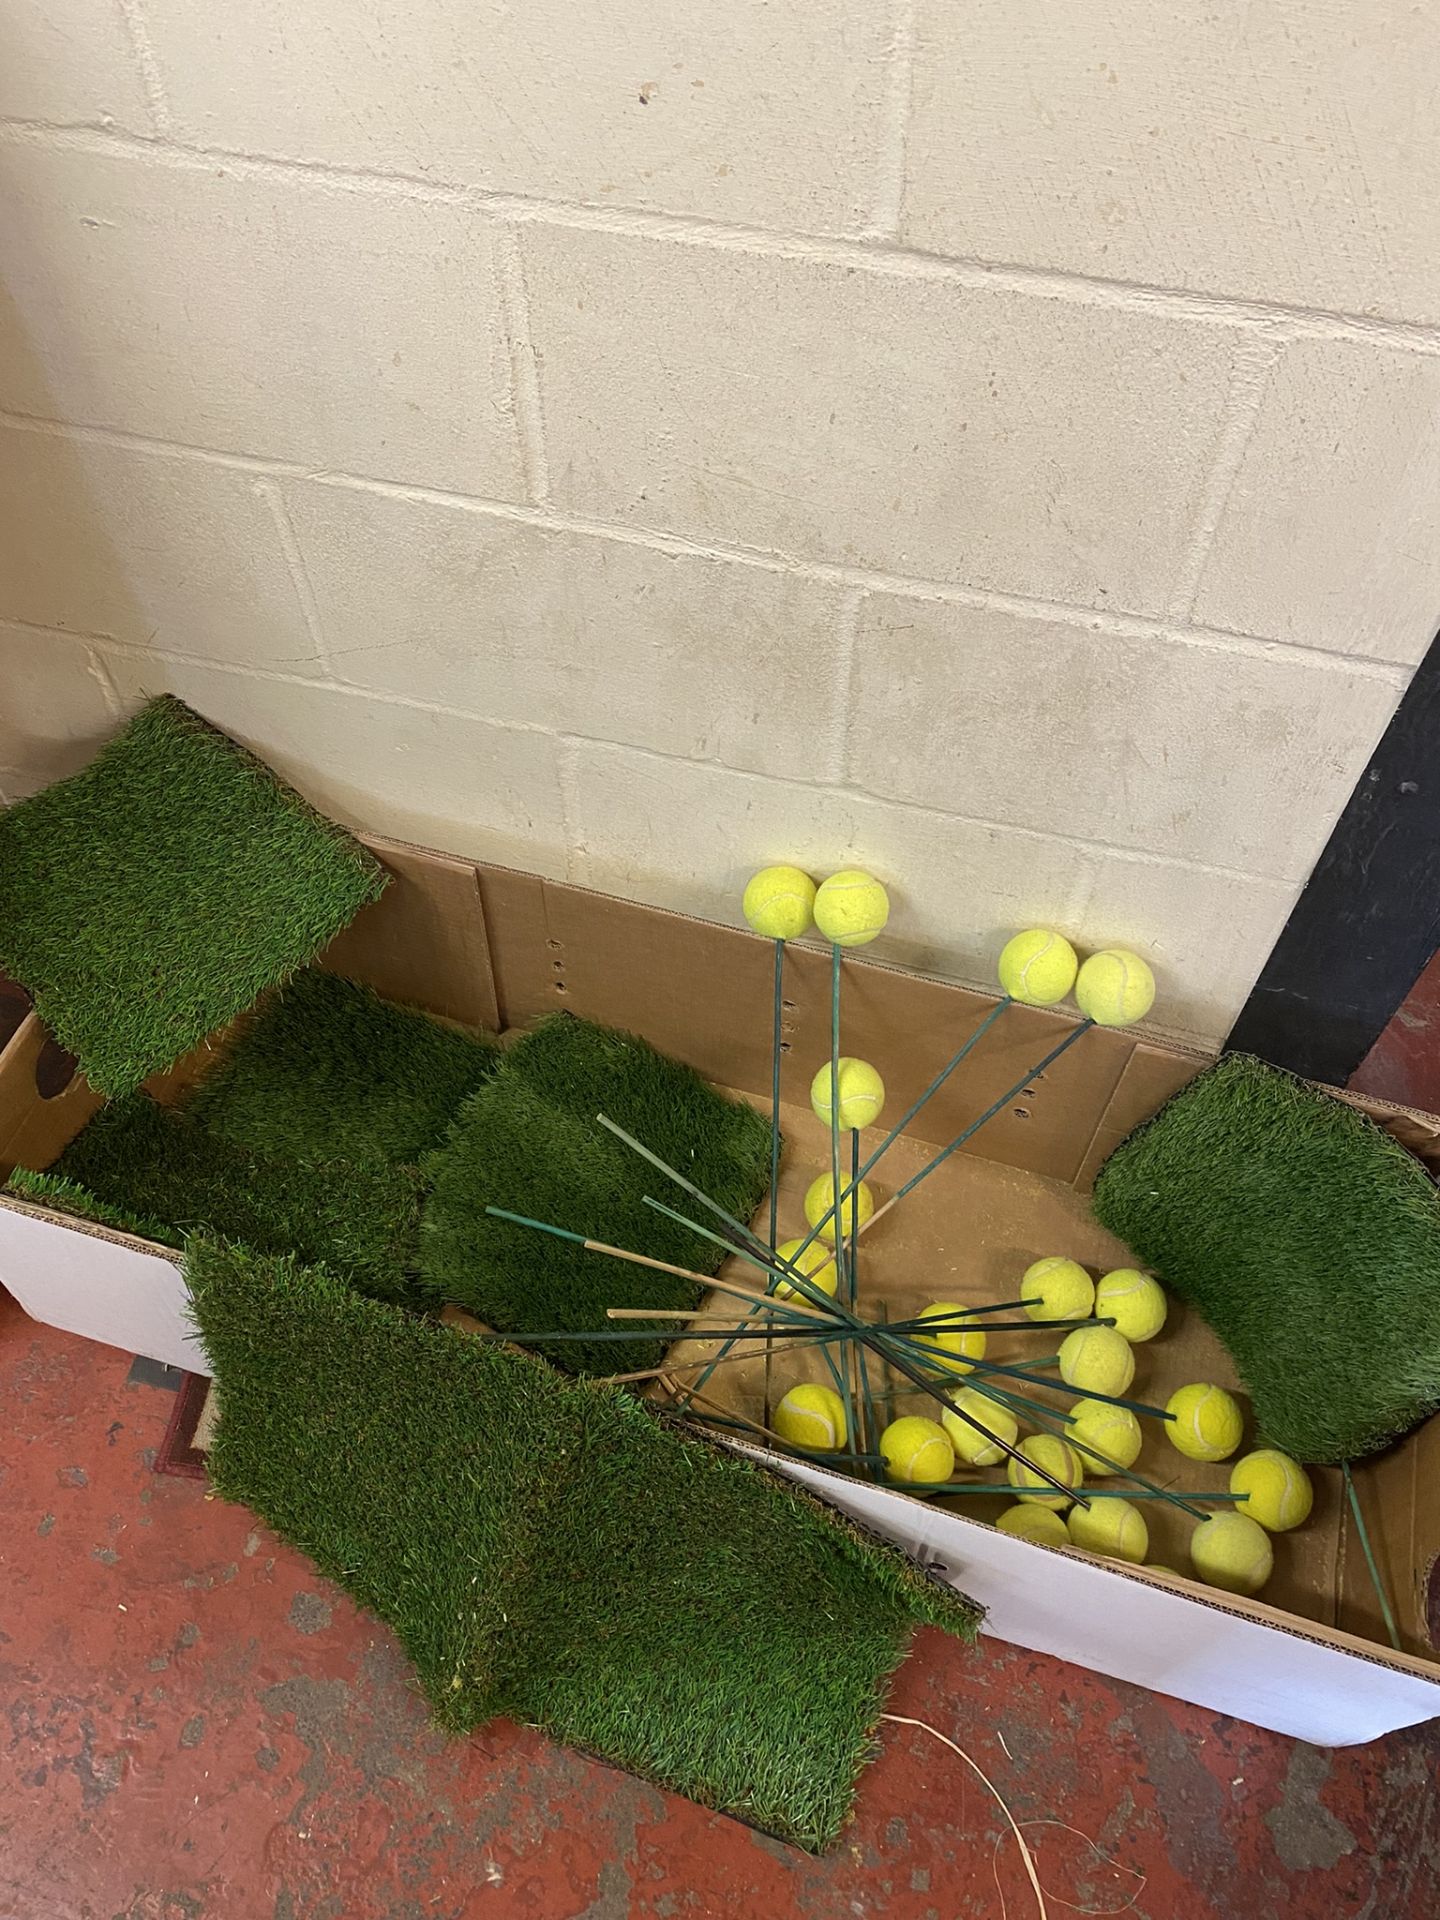 Collection of Training Tennis Balls on Sticks with Artificial Grass